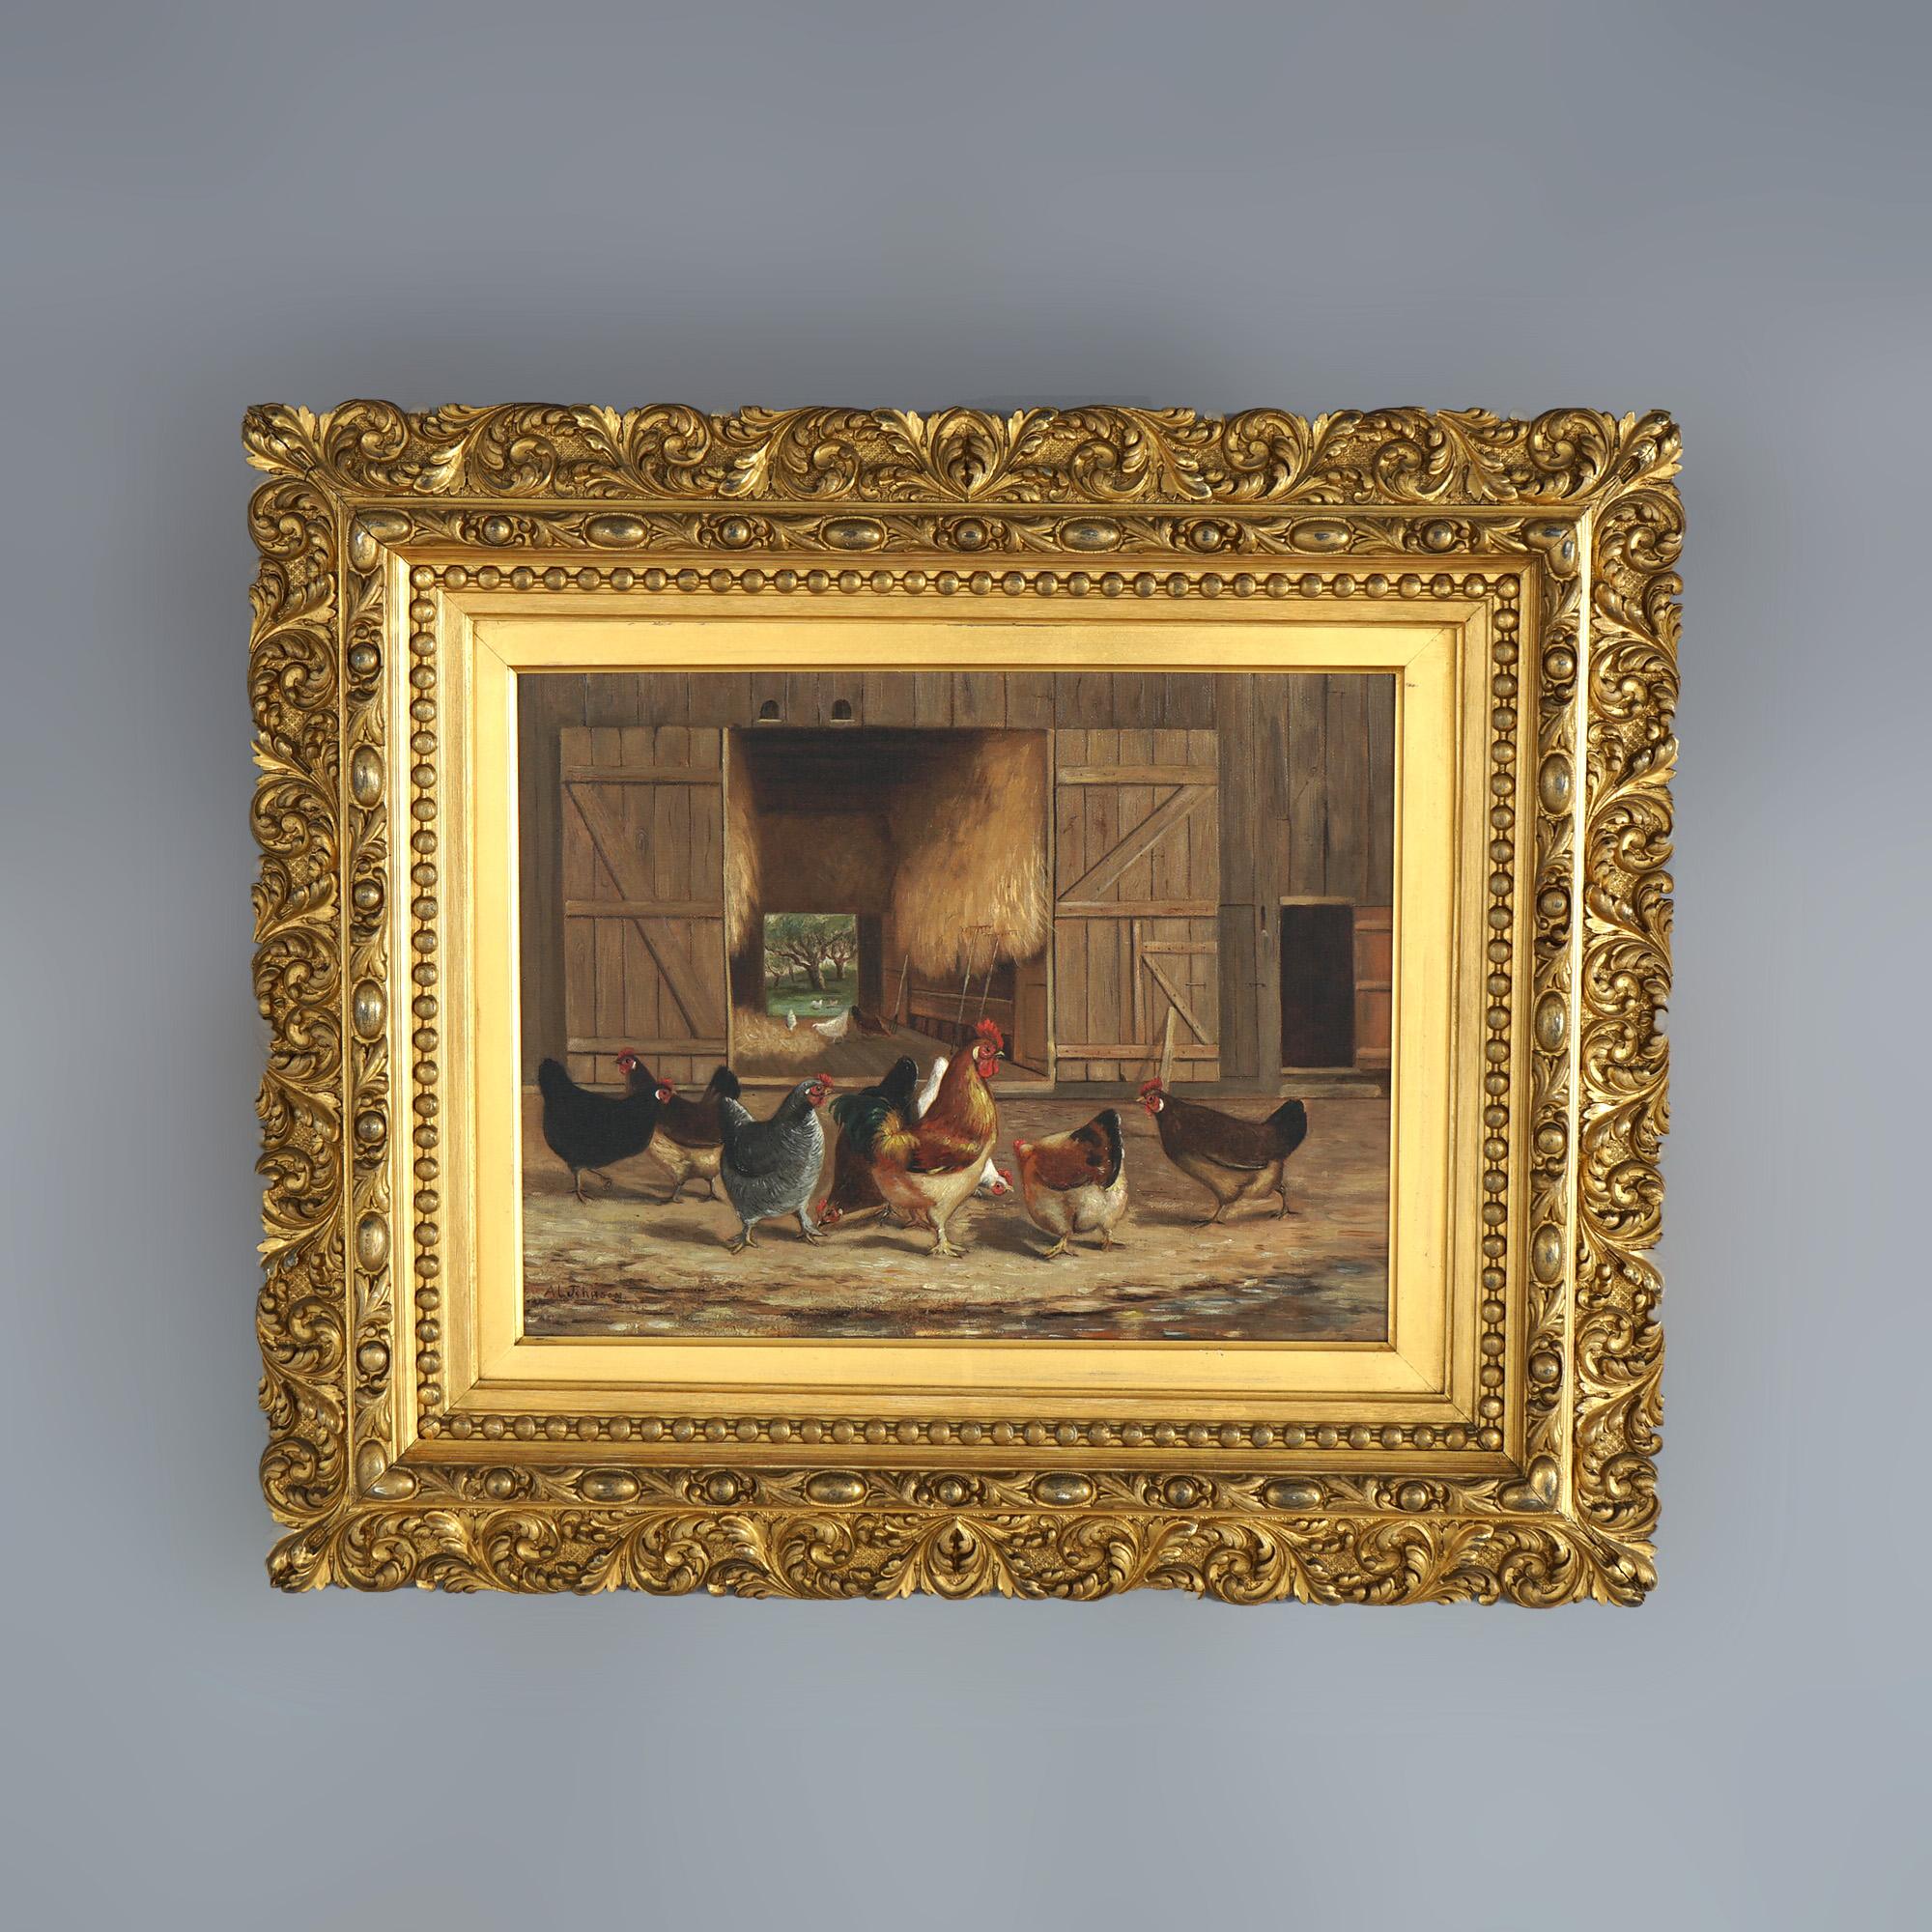 An antique painting by A. L. Johnson in the manner of Ben Austrian offers oil on canvas barnyard scene with chickens, artist signed, seated in giltwood frame, 19th c

Measures - 24